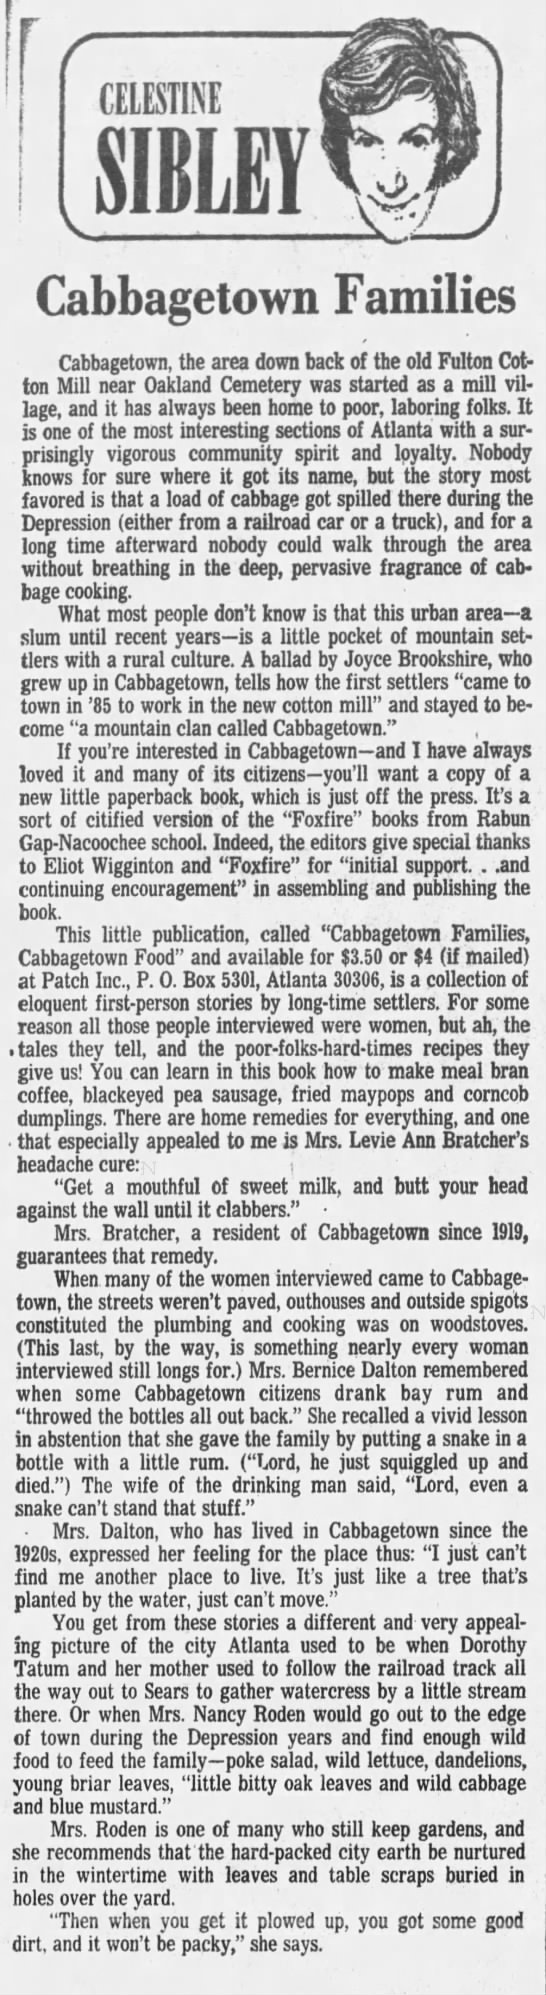 1976_1001_AJC Cabbagetown Families
By Celestine Sibley - 